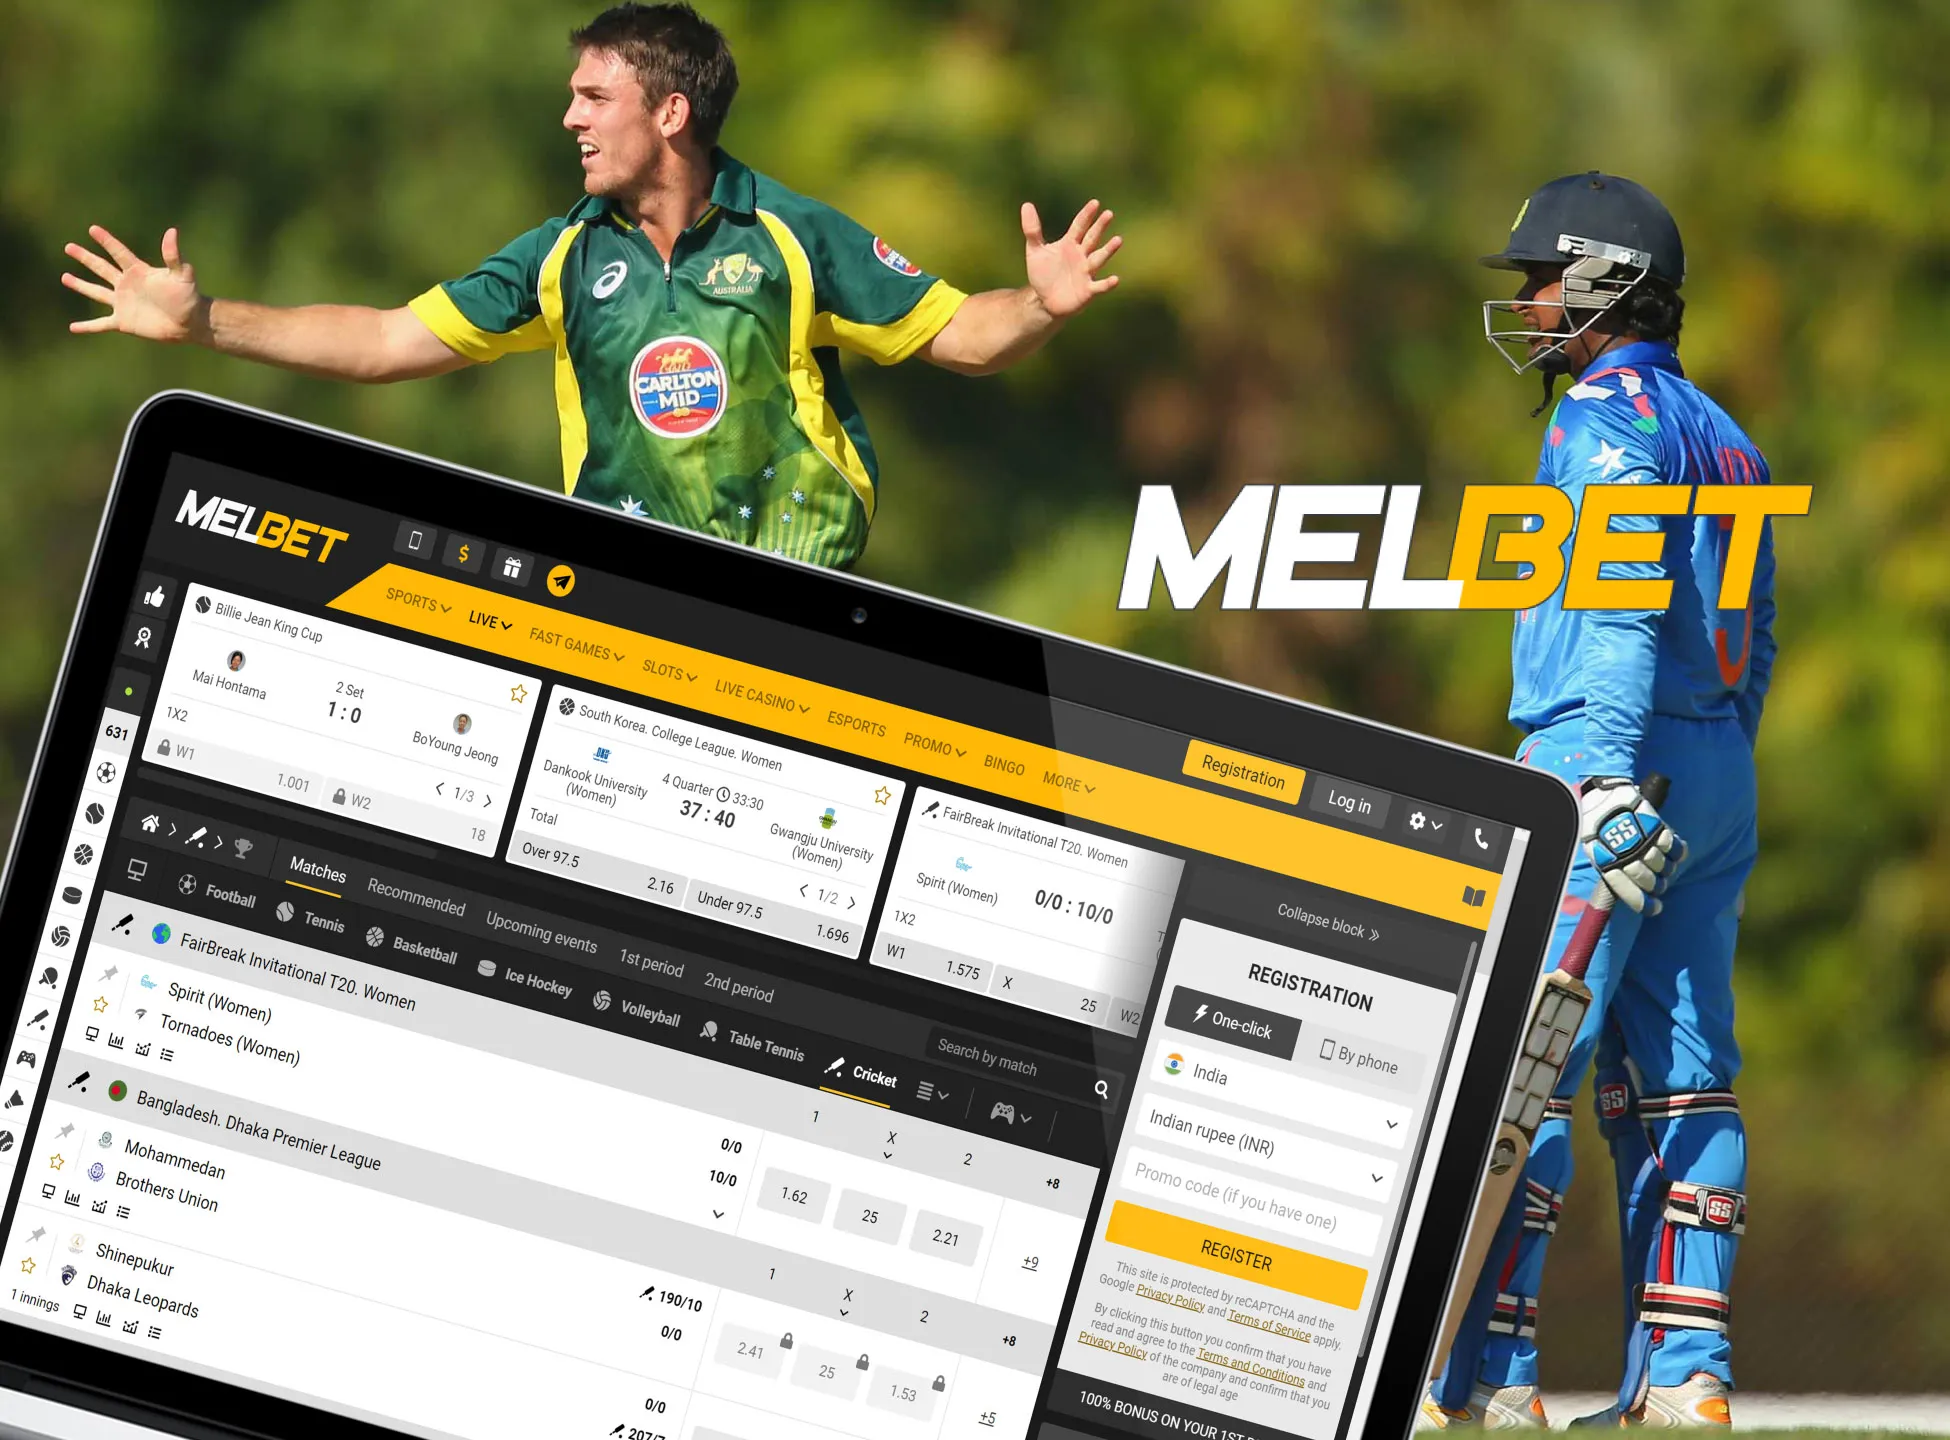 Melbet is a great betting company for cricket and other sports betting.